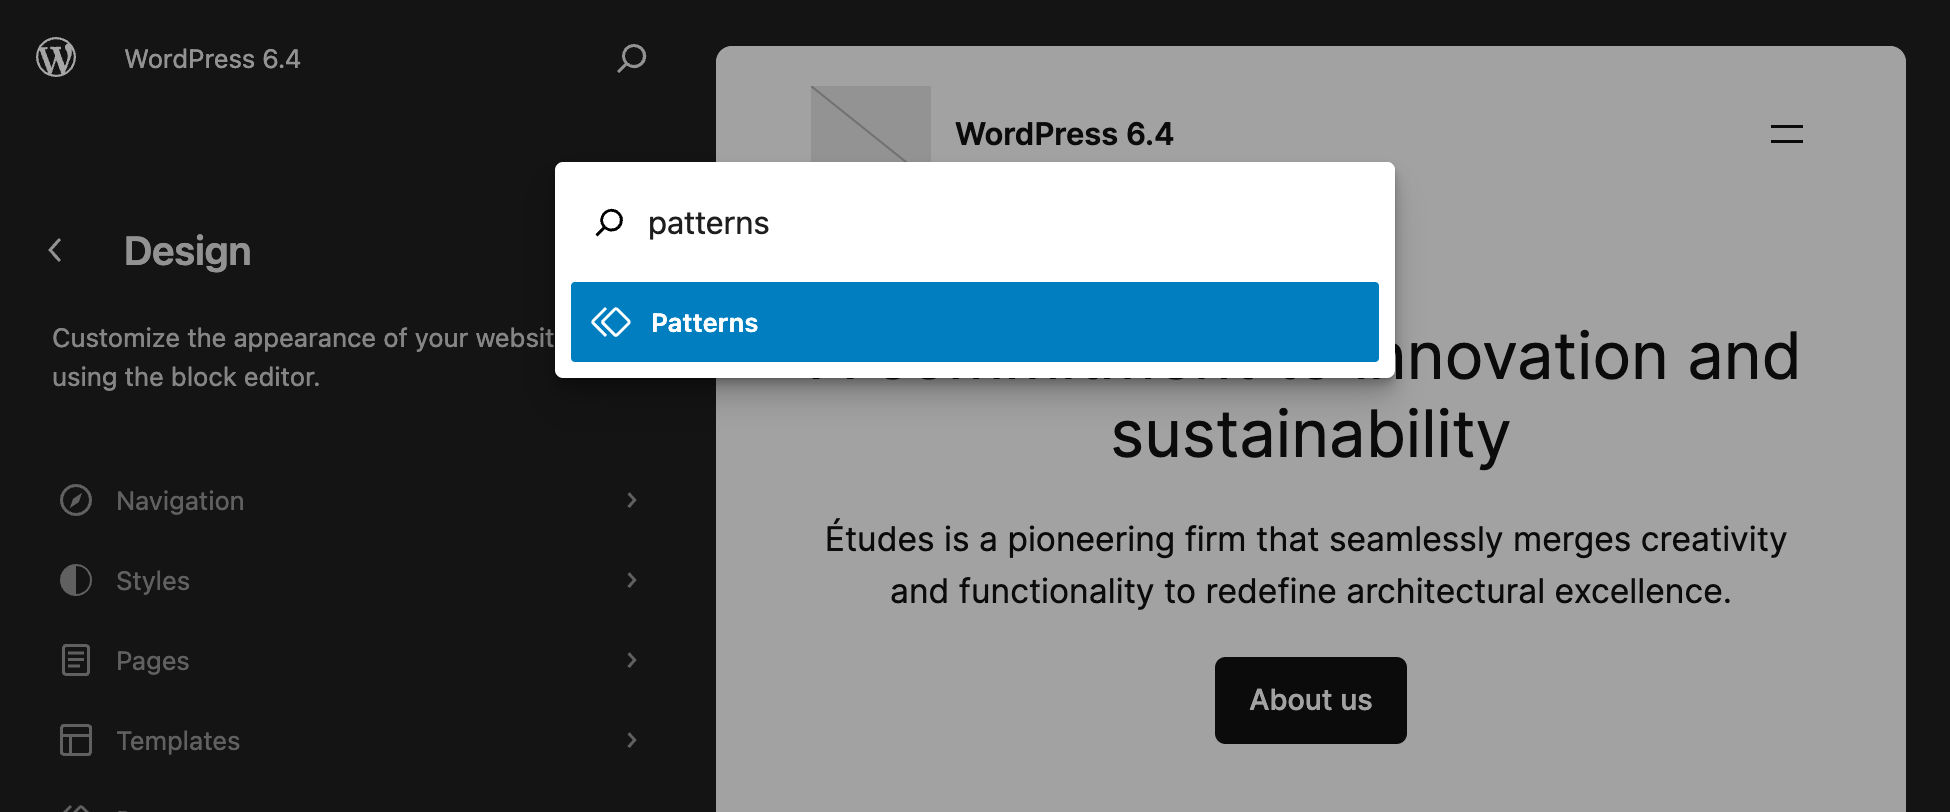 Searching for patterns in WordPress 6.4